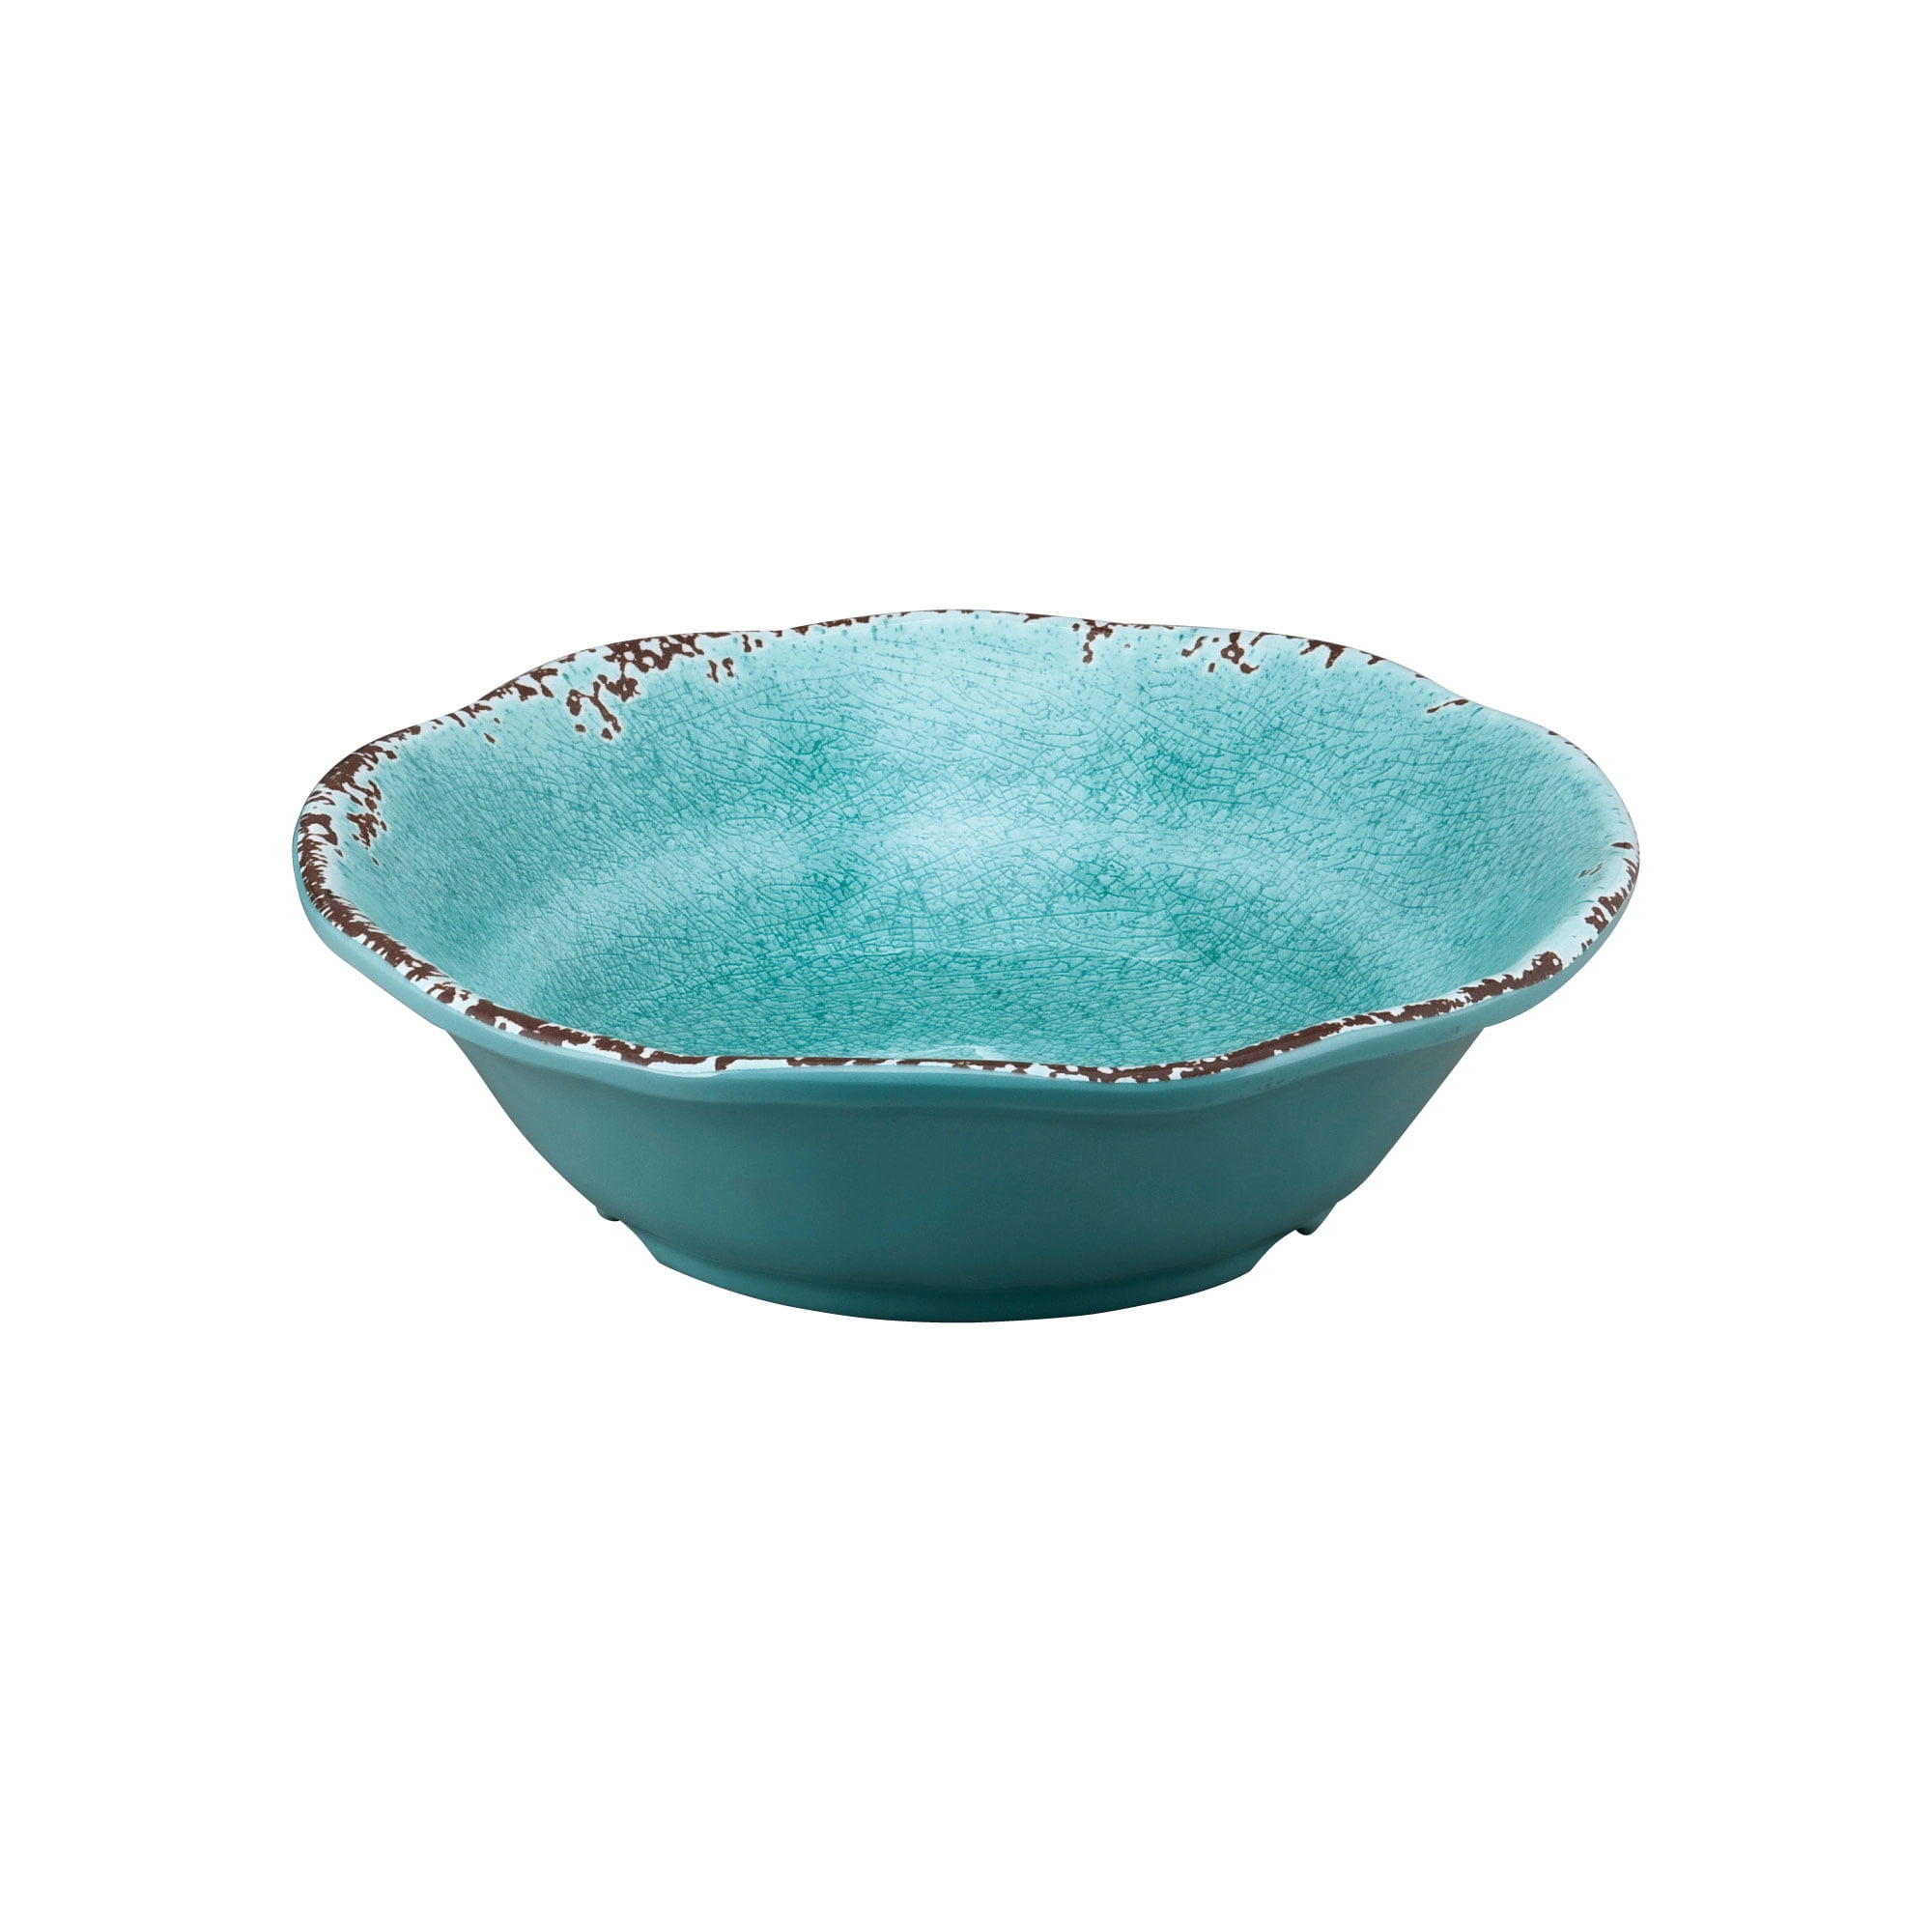 Gourmet Art 12-Piece Crackle Melamine Dinnerware Set, Turquoise, Service  for 4. Includes Dinner Plates, Salad Plates and Bowls. 